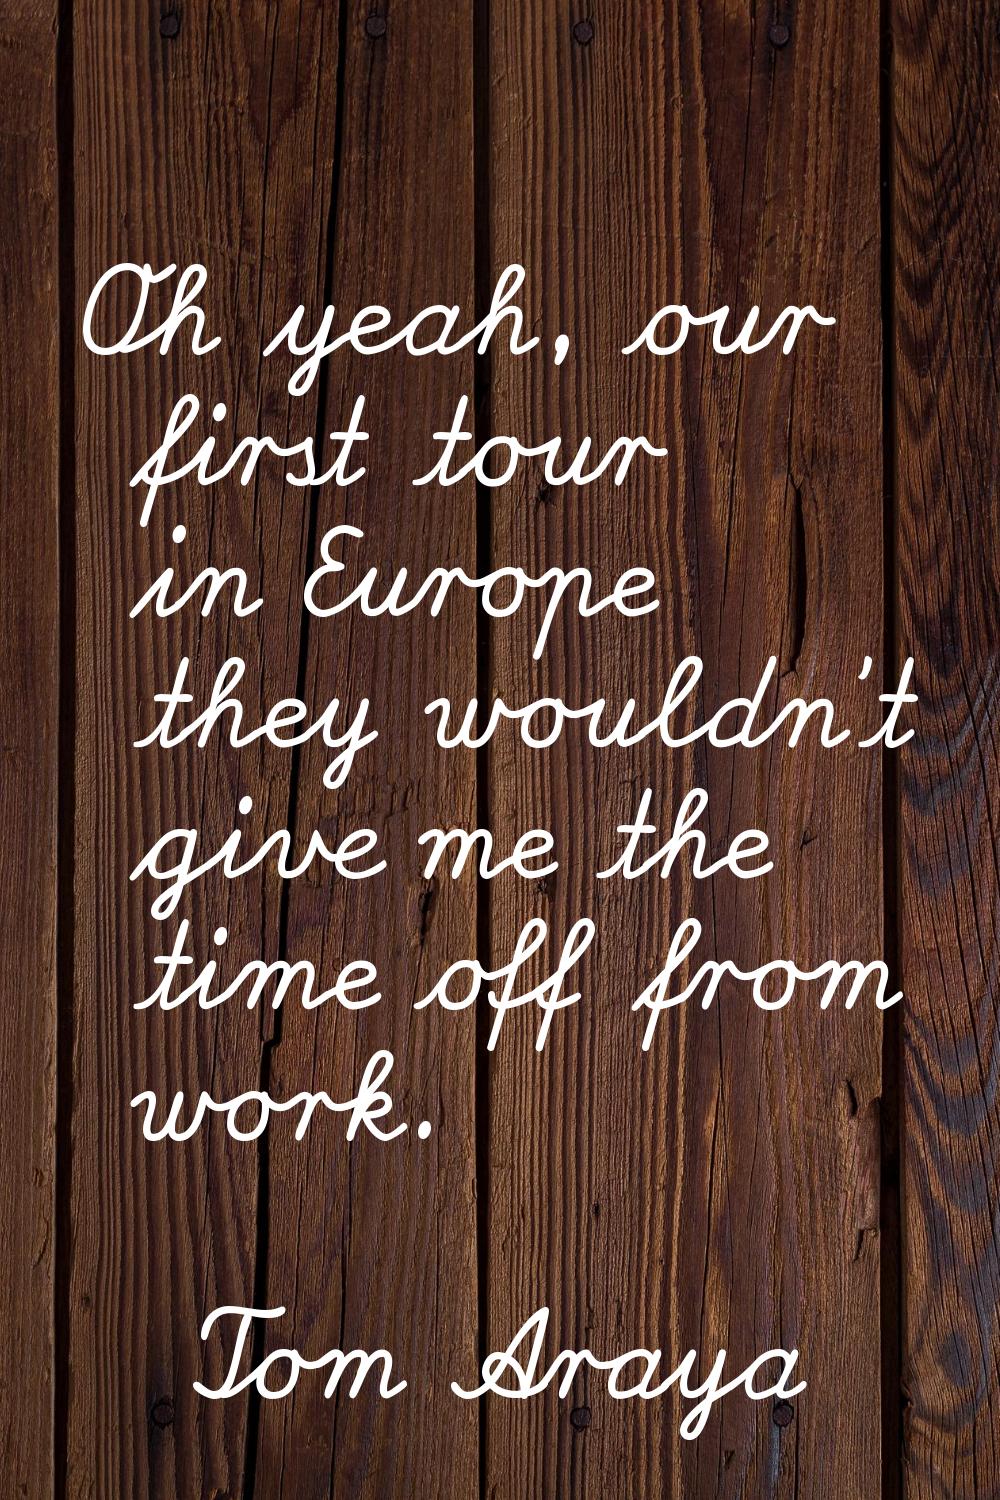 Oh yeah, our first tour in Europe they wouldn't give me the time off from work.